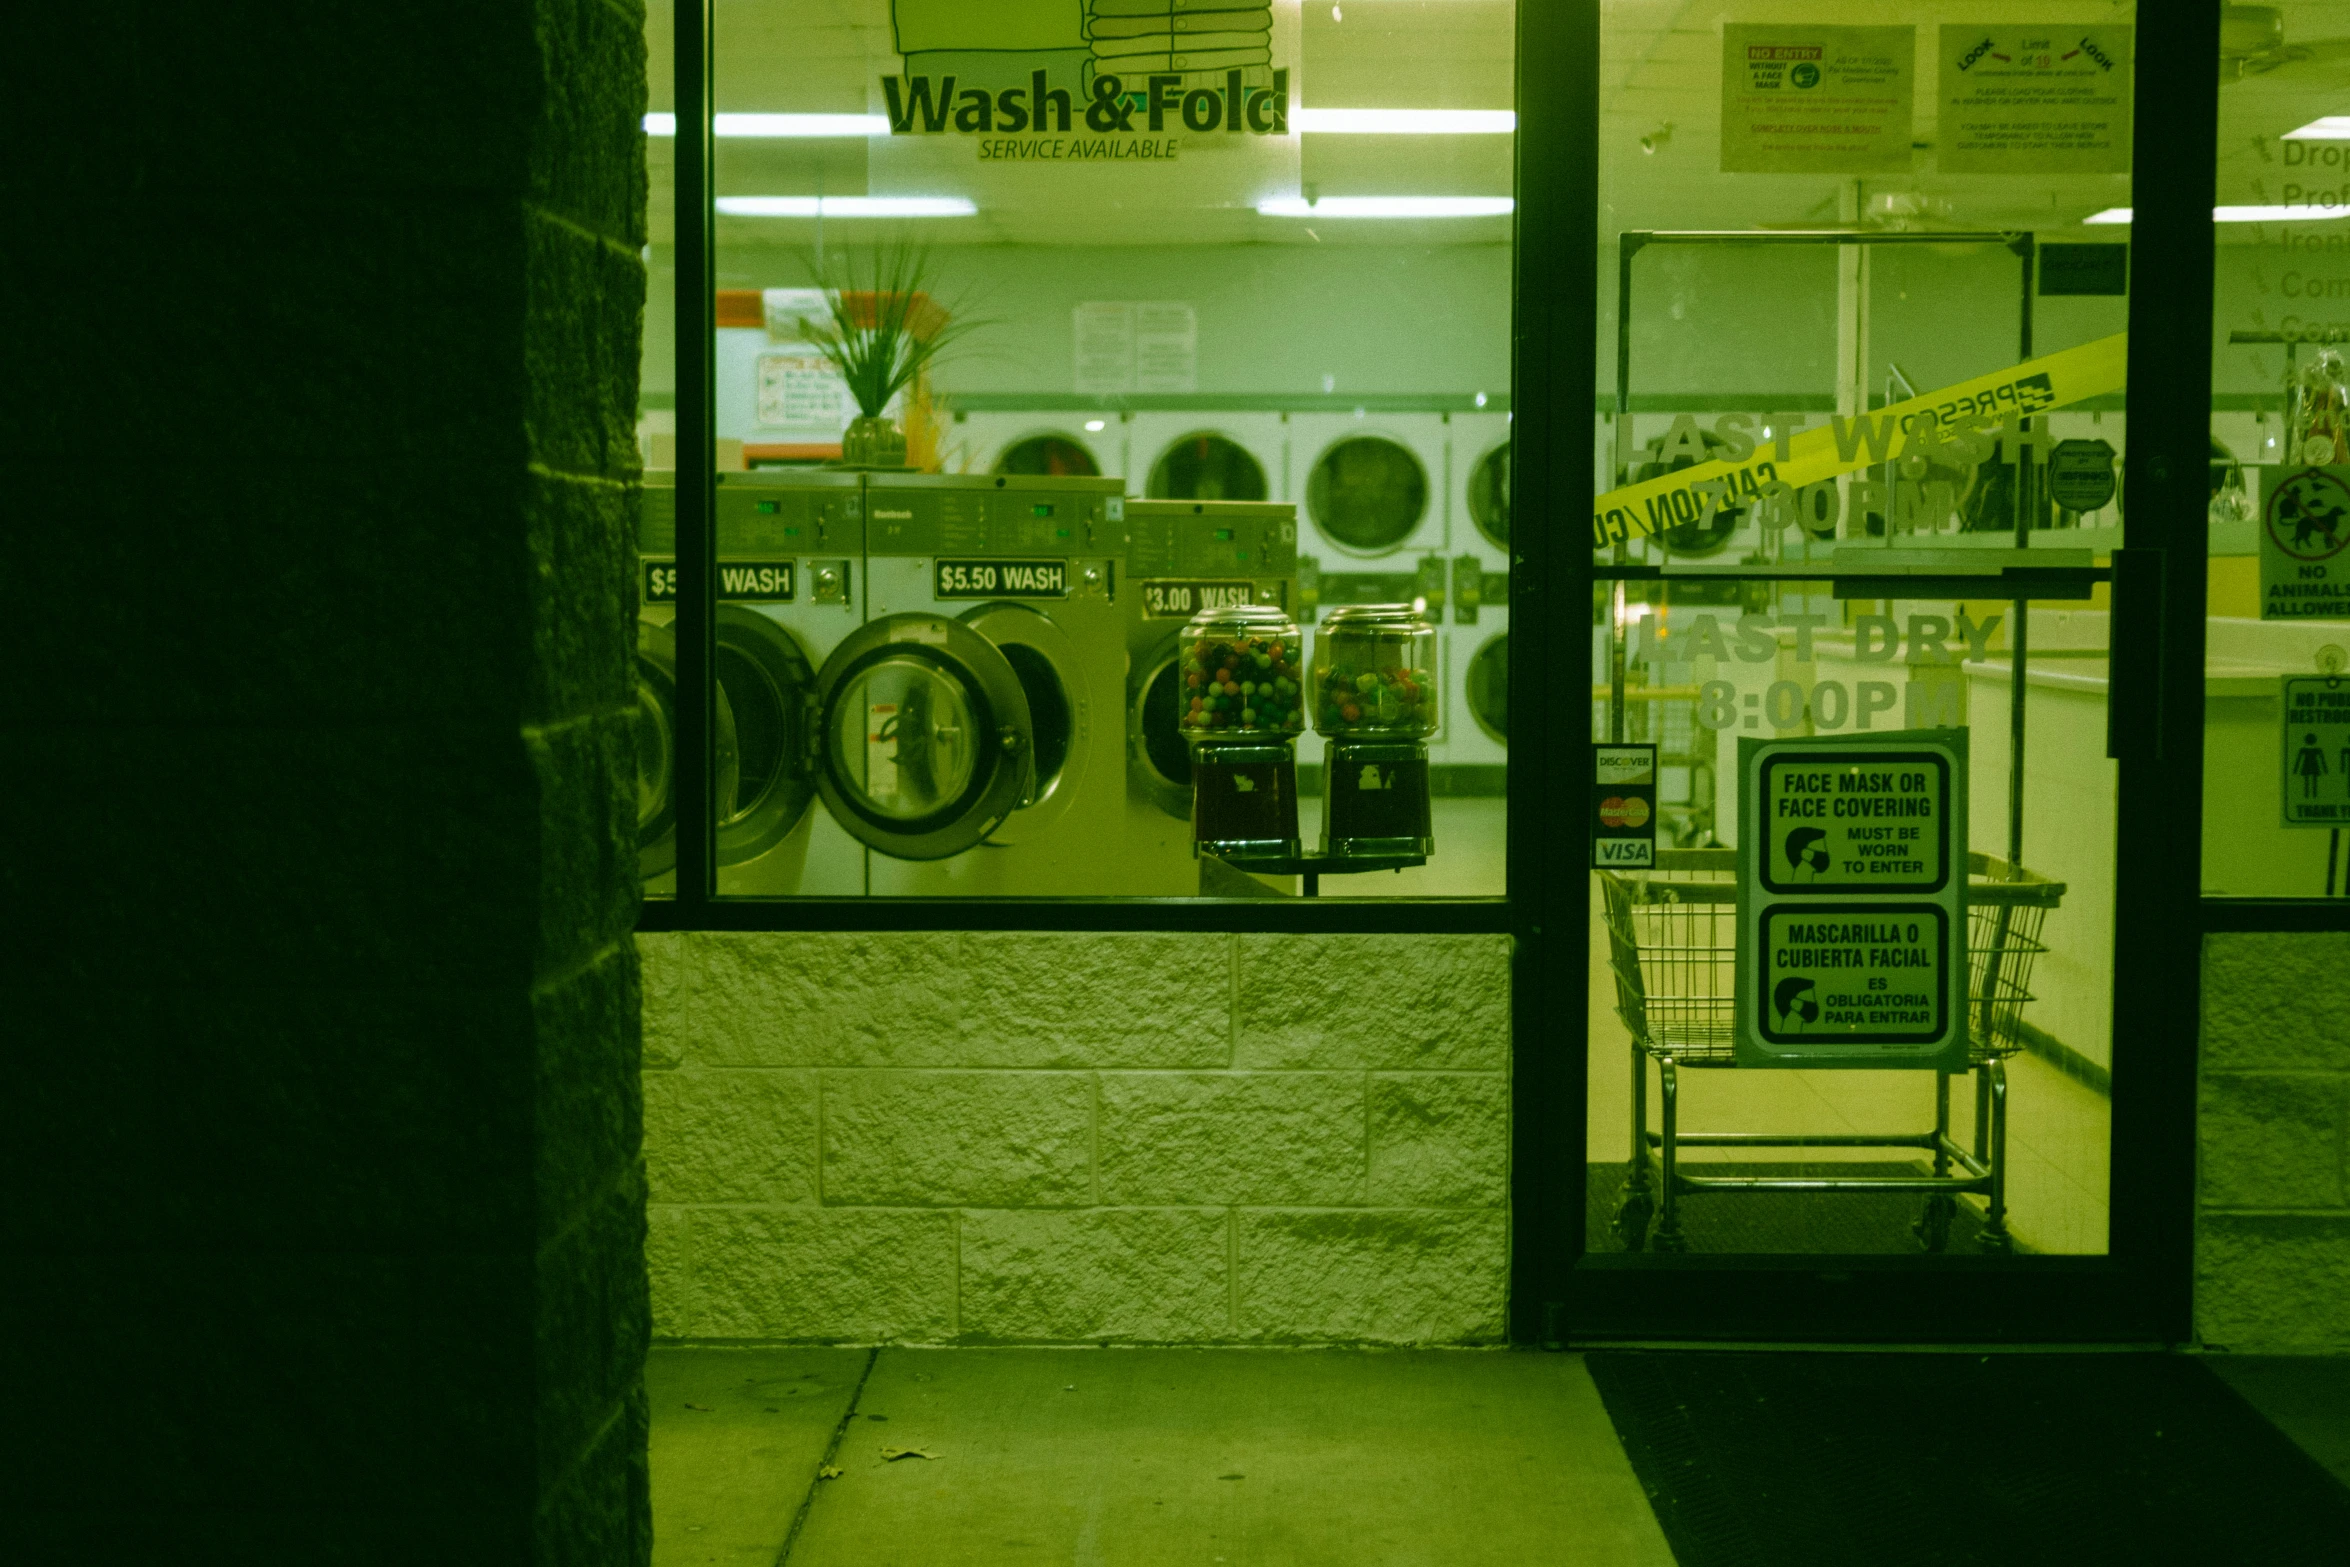 a store window in a store with signs on the windows